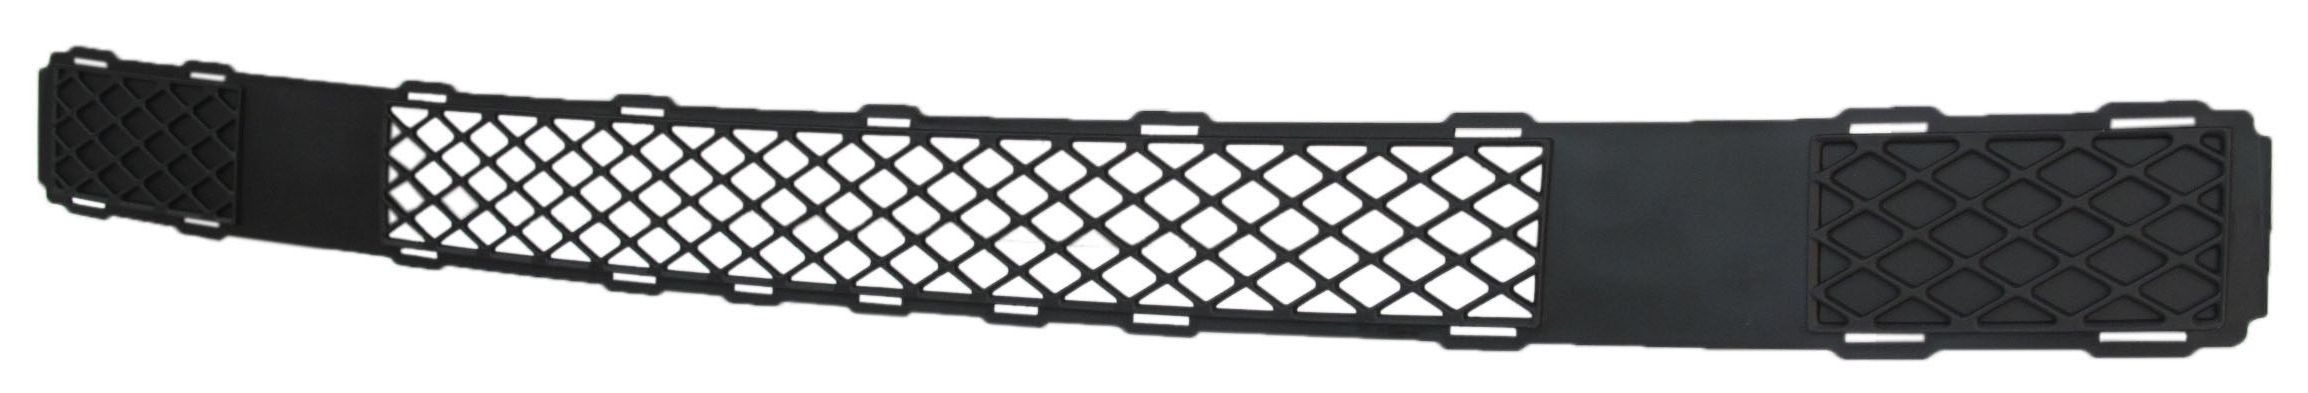 AVENGER 08-10 Front Bumper Grille LOWER With FOG H